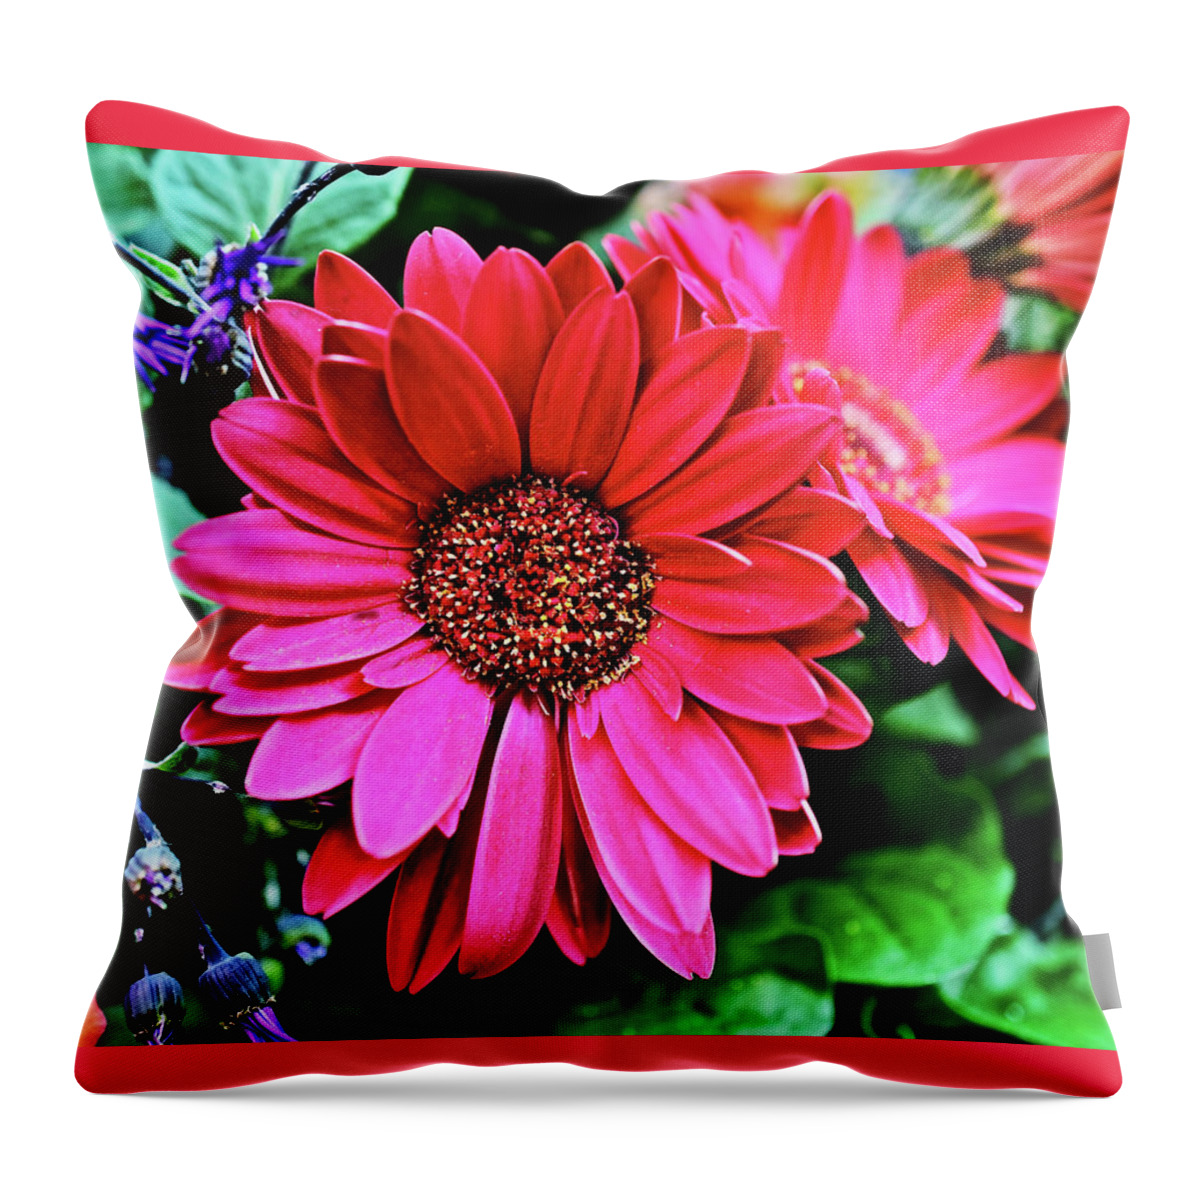 Daisy Throw Pillow featuring the photograph 2020 Red Gerber Daisy 2 by Janis Senungetuk